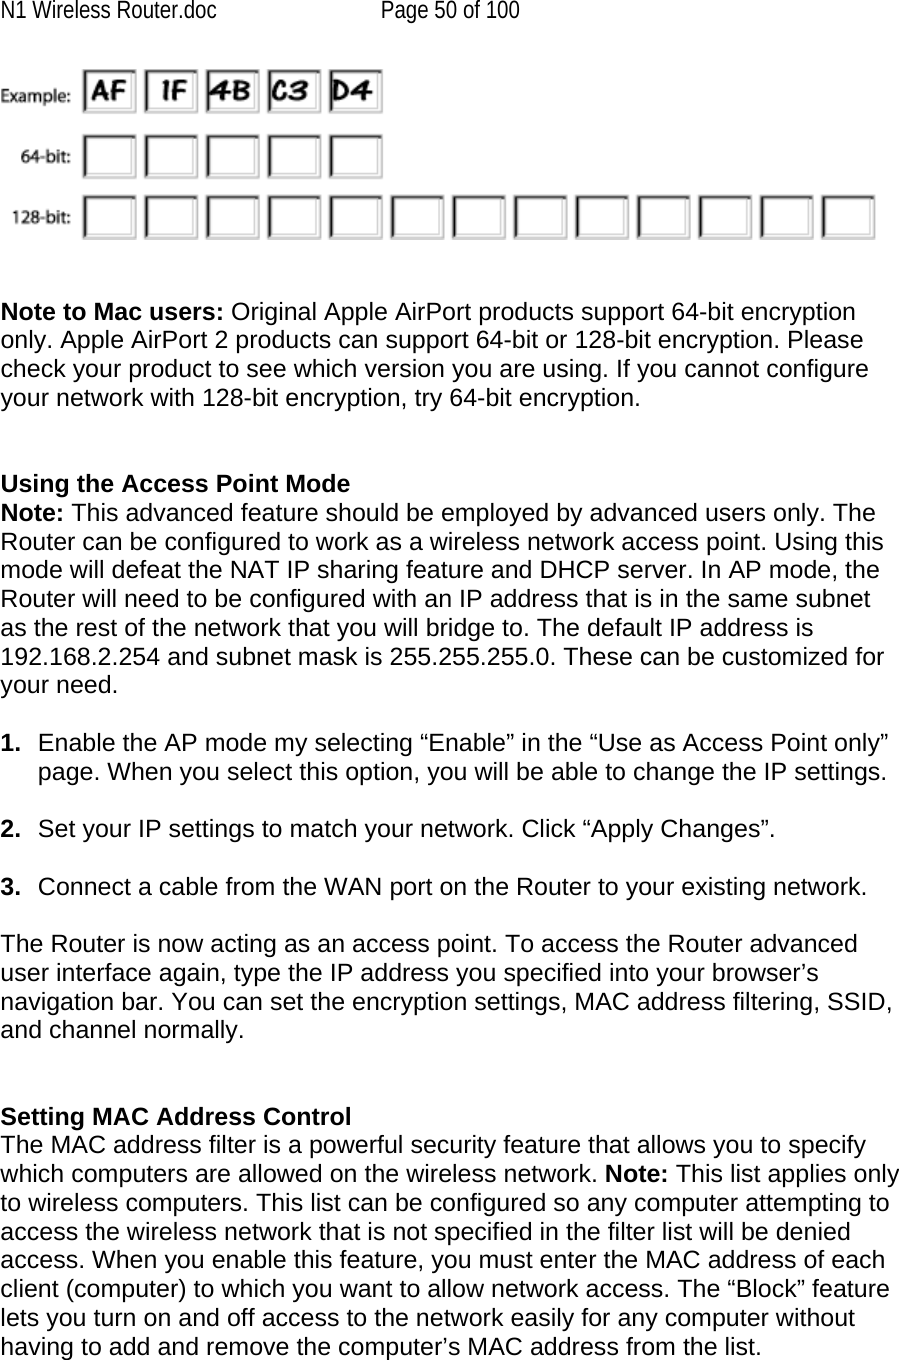 N1 Wireless Router.doc  Page 50 of 100    Note to Mac users: Original Apple AirPort products support 64-bit encryption only. Apple AirPort 2 products can support 64-bit or 128-bit encryption. Please check your product to see which version you are using. If you cannot configure your network with 128-bit encryption, try 64-bit encryption.   Using the Access Point Mode Note: This advanced feature should be employed by advanced users only. The Router can be configured to work as a wireless network access point. Using this mode will defeat the NAT IP sharing feature and DHCP server. In AP mode, the Router will need to be configured with an IP address that is in the same subnet as the rest of the network that you will bridge to. The default IP address is 192.168.2.254 and subnet mask is 255.255.255.0. These can be customized for your need.   1.  Enable the AP mode my selecting “Enable” in the “Use as Access Point only” page. When you select this option, you will be able to change the IP settings.   2.  Set your IP settings to match your network. Click “Apply Changes”.  3.  Connect a cable from the WAN port on the Router to your existing network.  The Router is now acting as an access point. To access the Router advanced user interface again, type the IP address you specified into your browser’s navigation bar. You can set the encryption settings, MAC address filtering, SSID, and channel normally.   Setting MAC Address Control  The MAC address filter is a powerful security feature that allows you to specify which computers are allowed on the wireless network. Note: This list applies only to wireless computers. This list can be configured so any computer attempting to access the wireless network that is not specified in the filter list will be denied access. When you enable this feature, you must enter the MAC address of each client (computer) to which you want to allow network access. The “Block” feature lets you turn on and off access to the network easily for any computer without having to add and remove the computer’s MAC address from the list.  